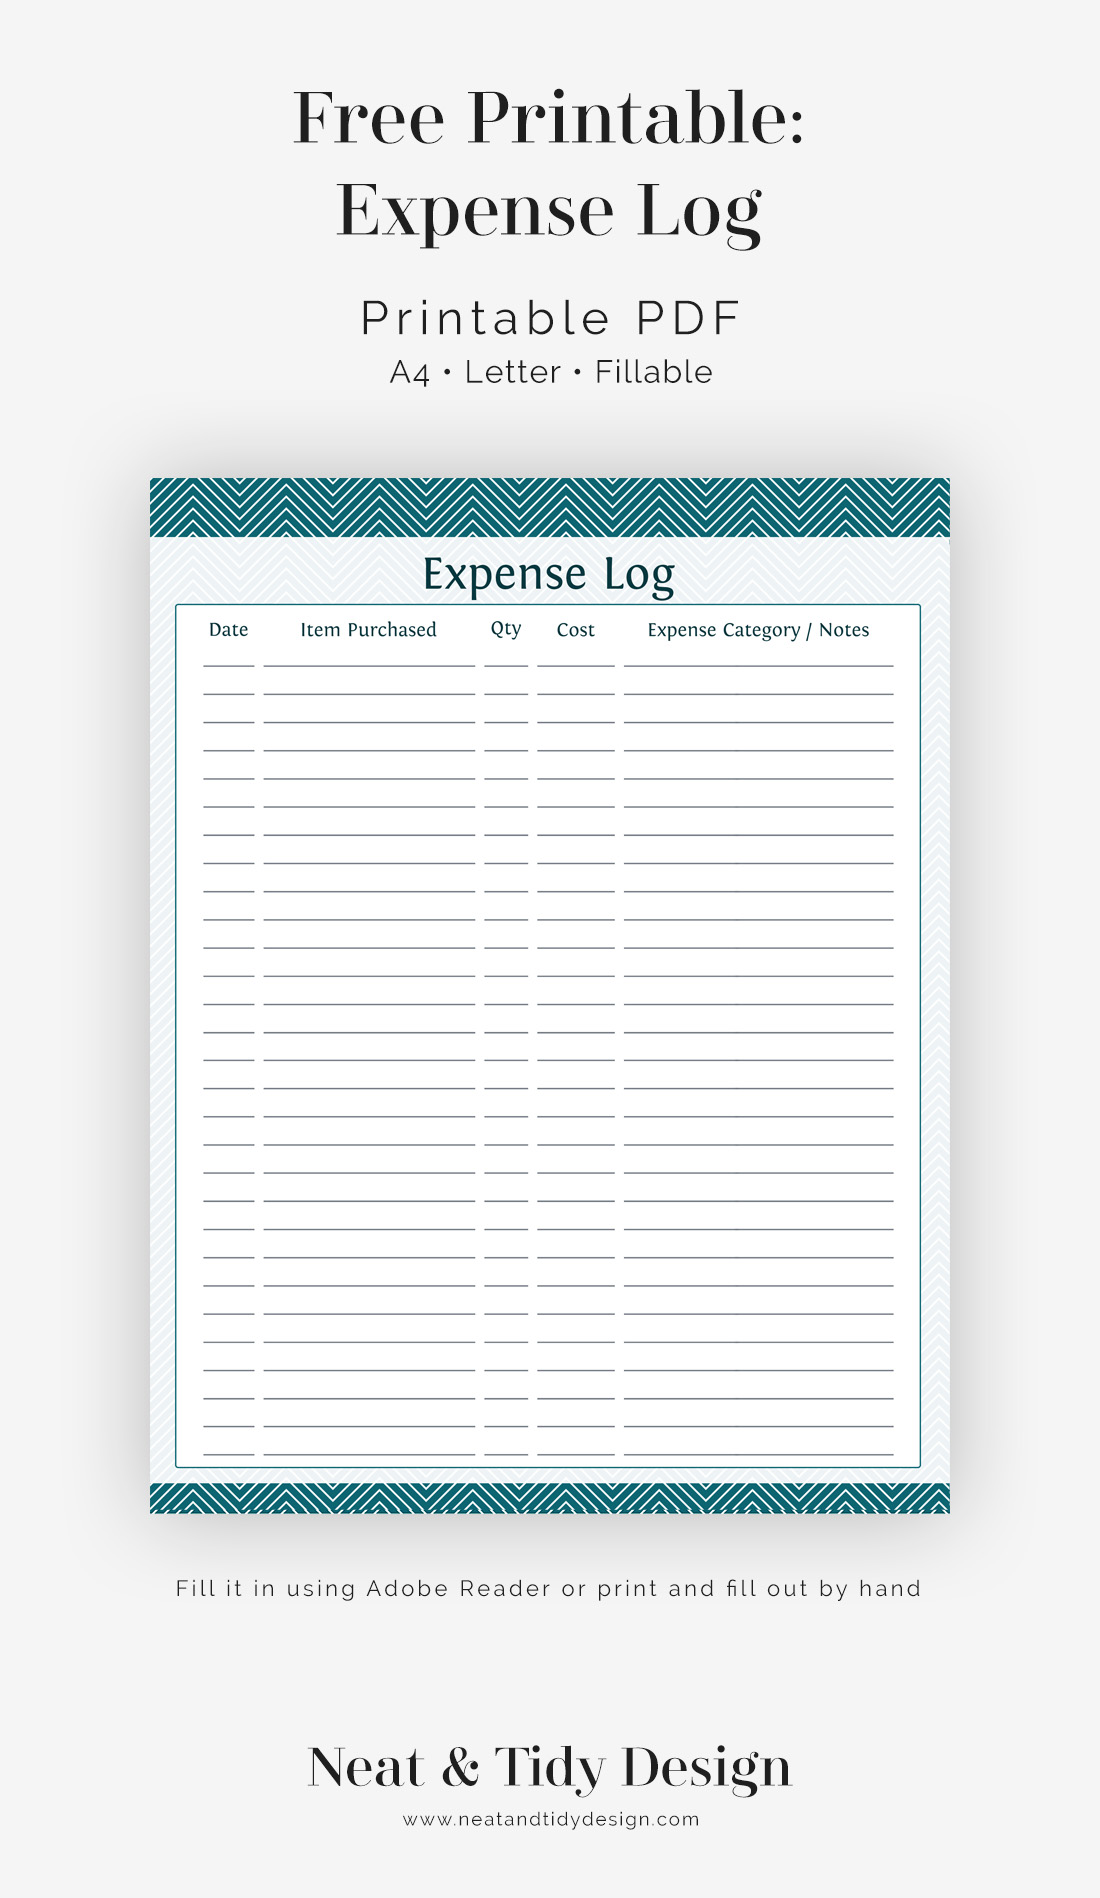 free-printable-expense-log-neat-and-tidy-design